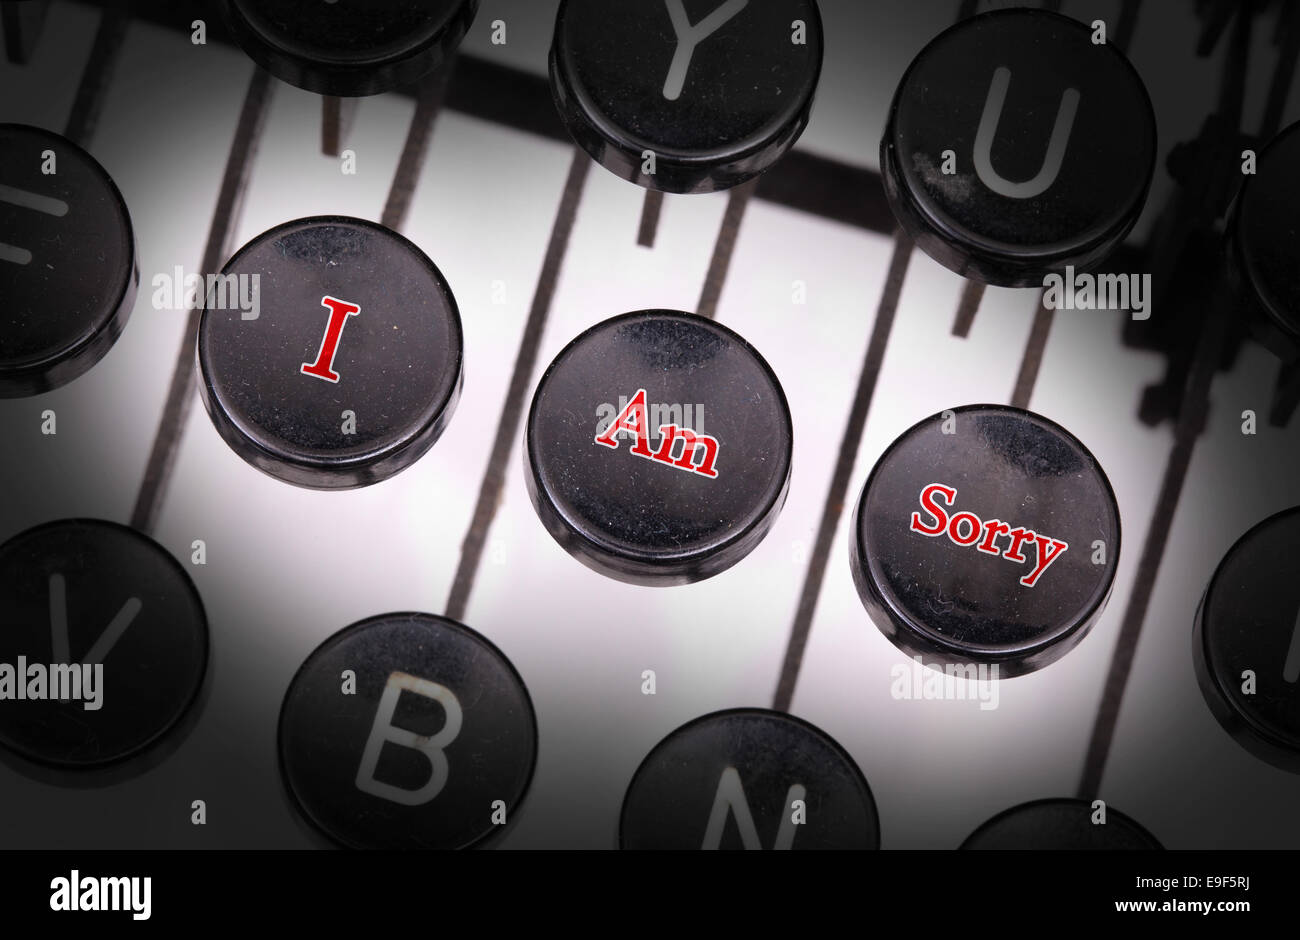 Typewriter with special buttons, I am sorry Stock Photo